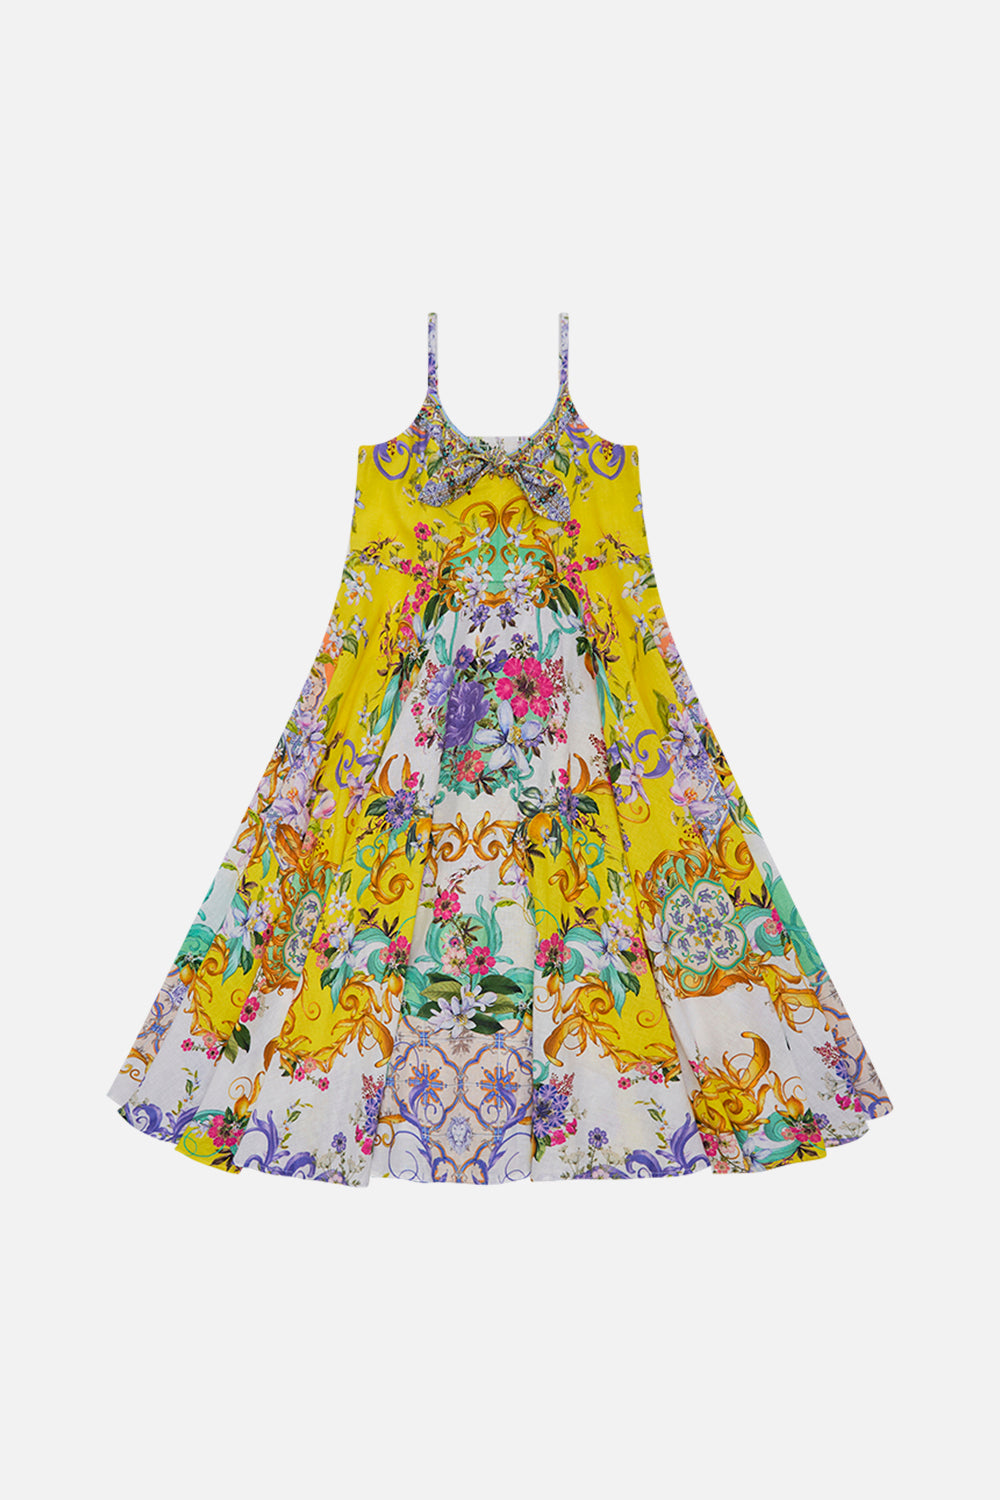 Product view of MILLA BY CAMILLA kids yellow floral dress in Caterina Spritz print